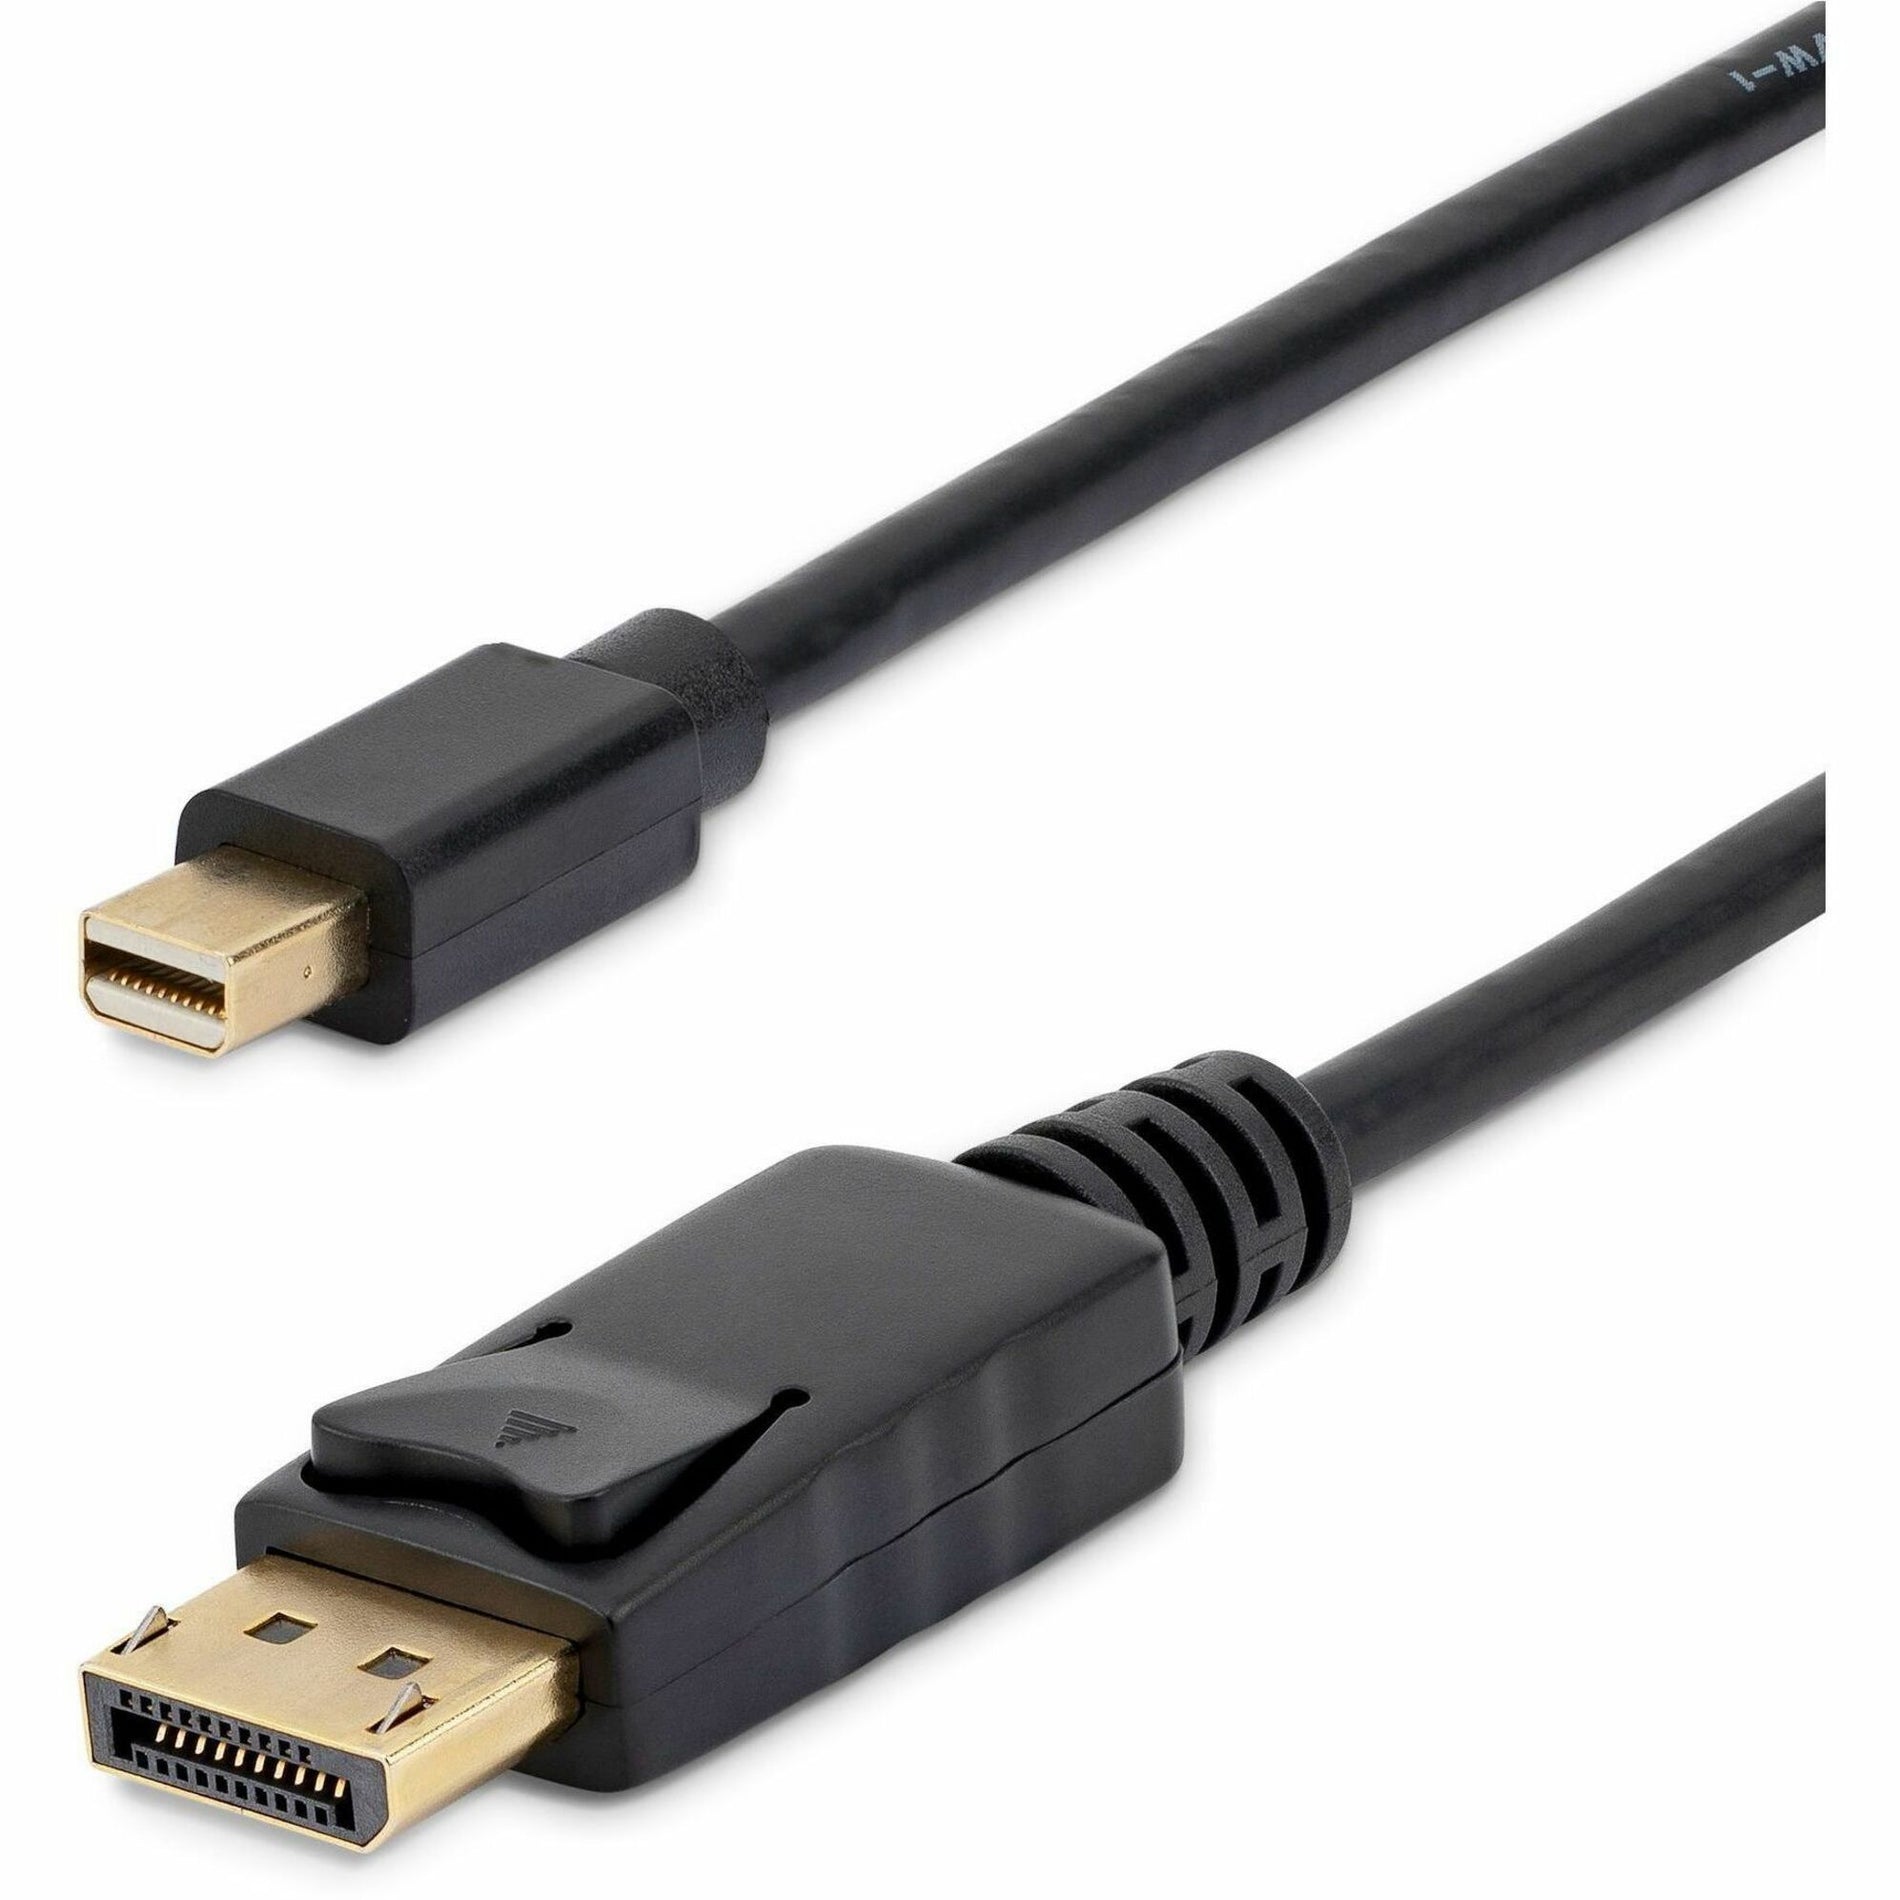 StarTech.com MDP2DPMM6 6 ft Mini DisplayPort to DisplayPort 1.2 Adapter Cable M/M, 4k DisplayPort/Mini DisplayPort A/V Cable